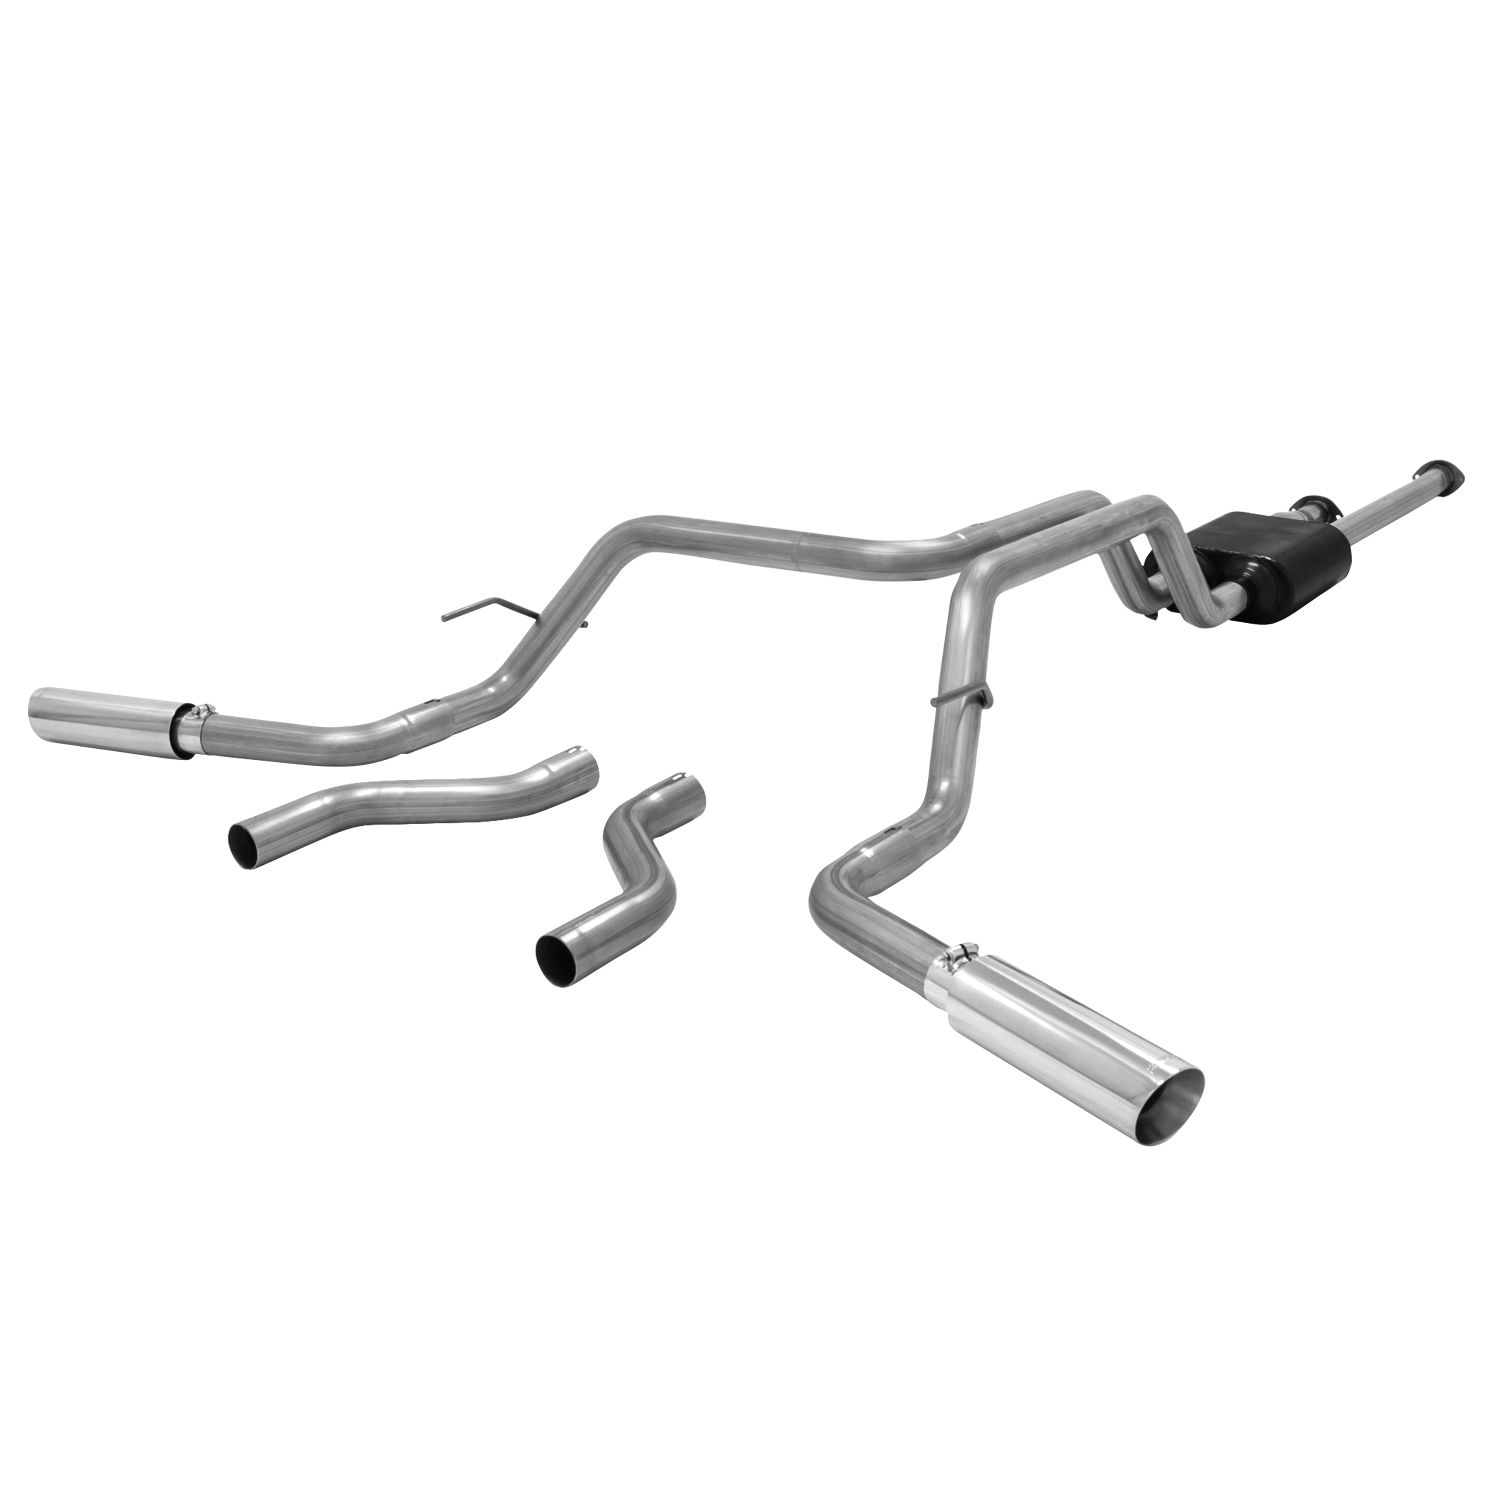 2016 Toyota Tundra 4.6L/5.7L Flowmaster American Thunder Cat-Back Exhaust - 817664